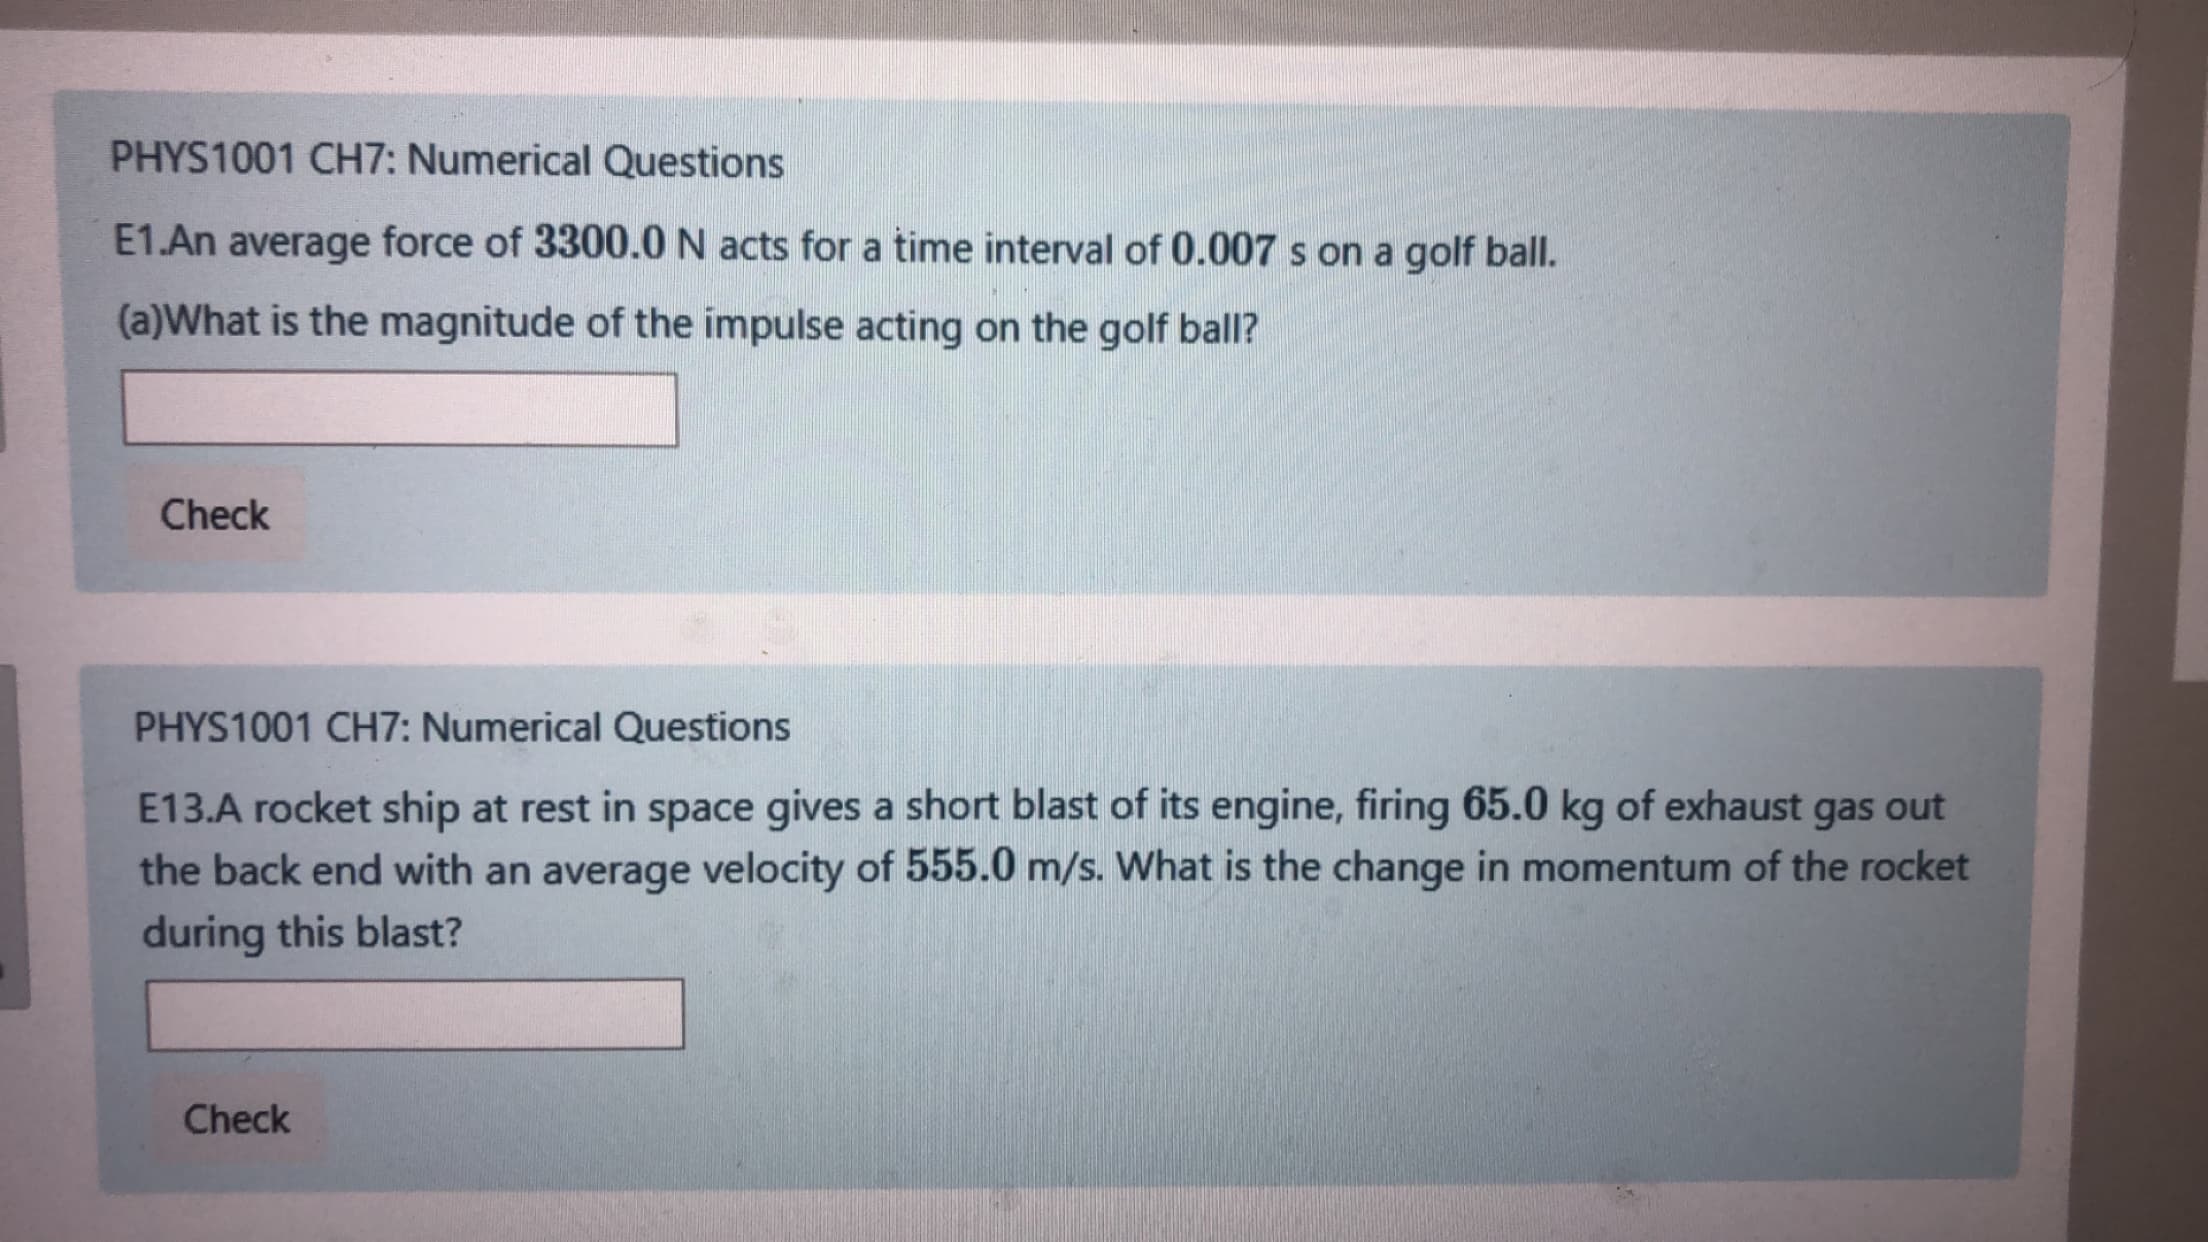 PHYS1001 CH7: Numerical Questions
E1.An average force of 3300.0 N acts for a time interval of 0.007 s on a golf ball.
(a)What is the magnitude of the impulse acting on the golf ball?
Check
PHYS1001 CH7: Numerical Questions
E13.A rocket ship at rest in space gives a short blast of its engine, firing 65.0 kg of exhaust
the back end with an average velocity of 555.0 m/s. What is the change in momentum of the rocket
during this blast?
gas
out
Check
